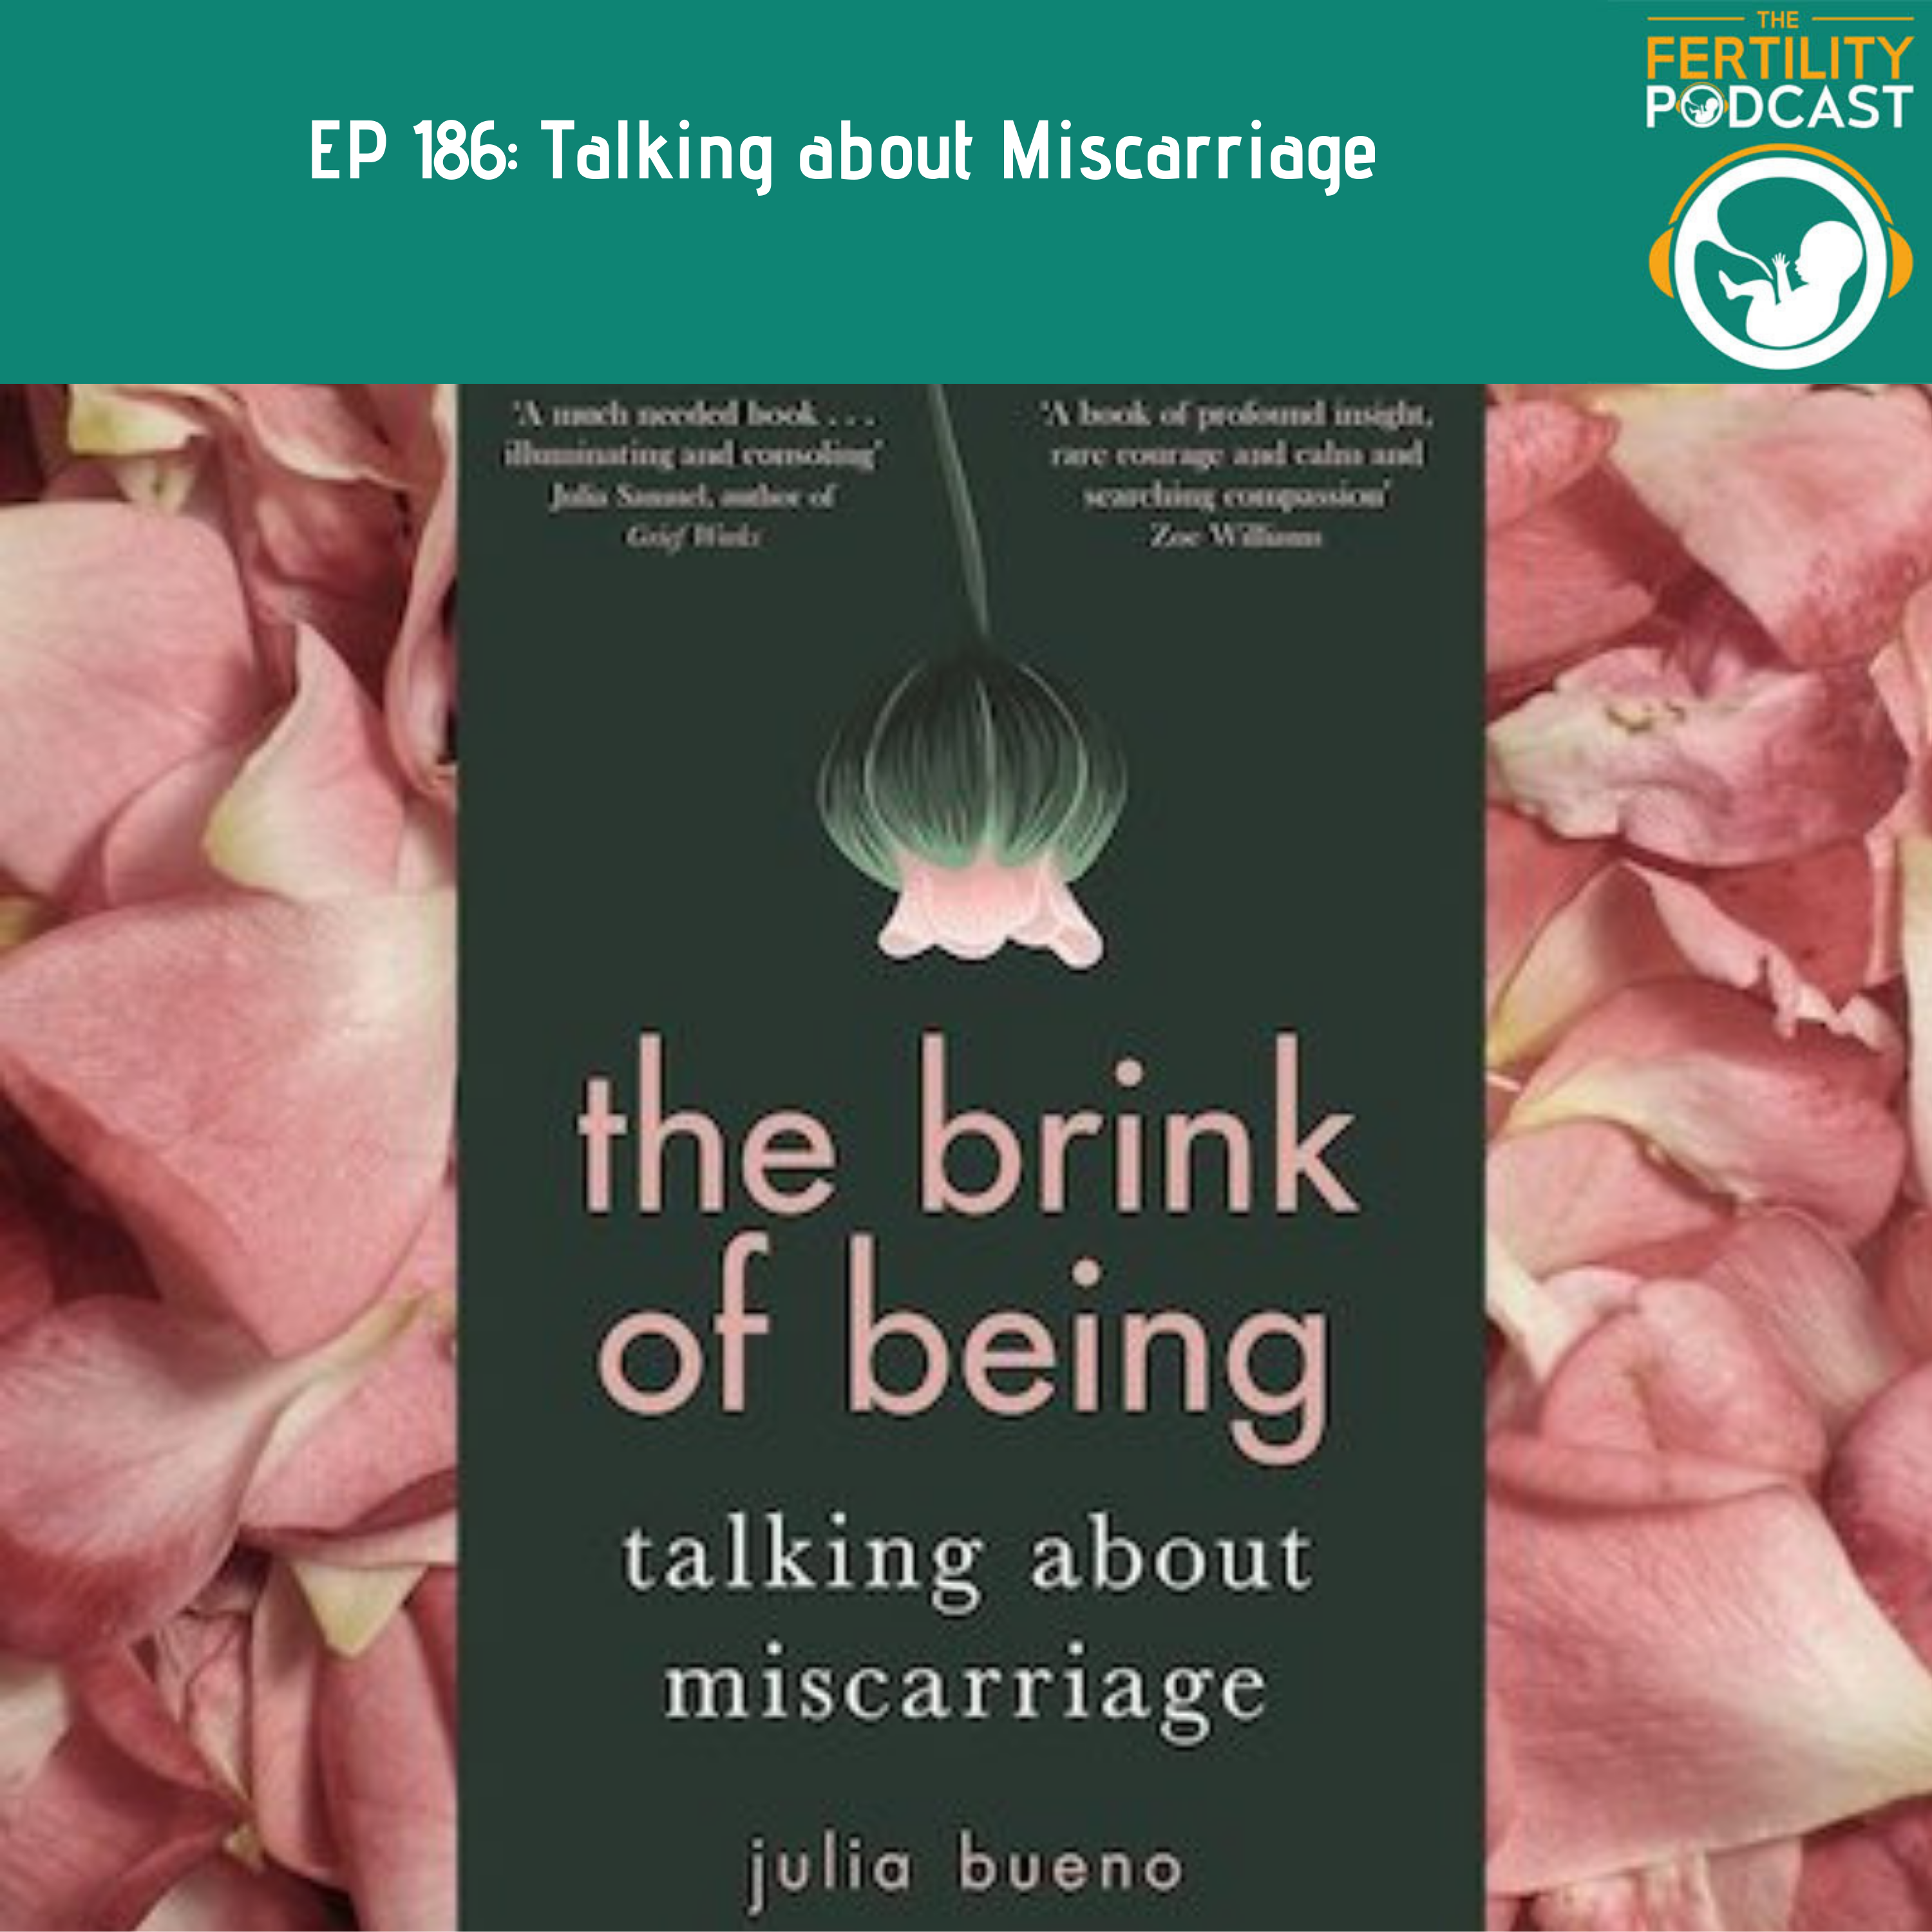 How do I talk about miscarriage?